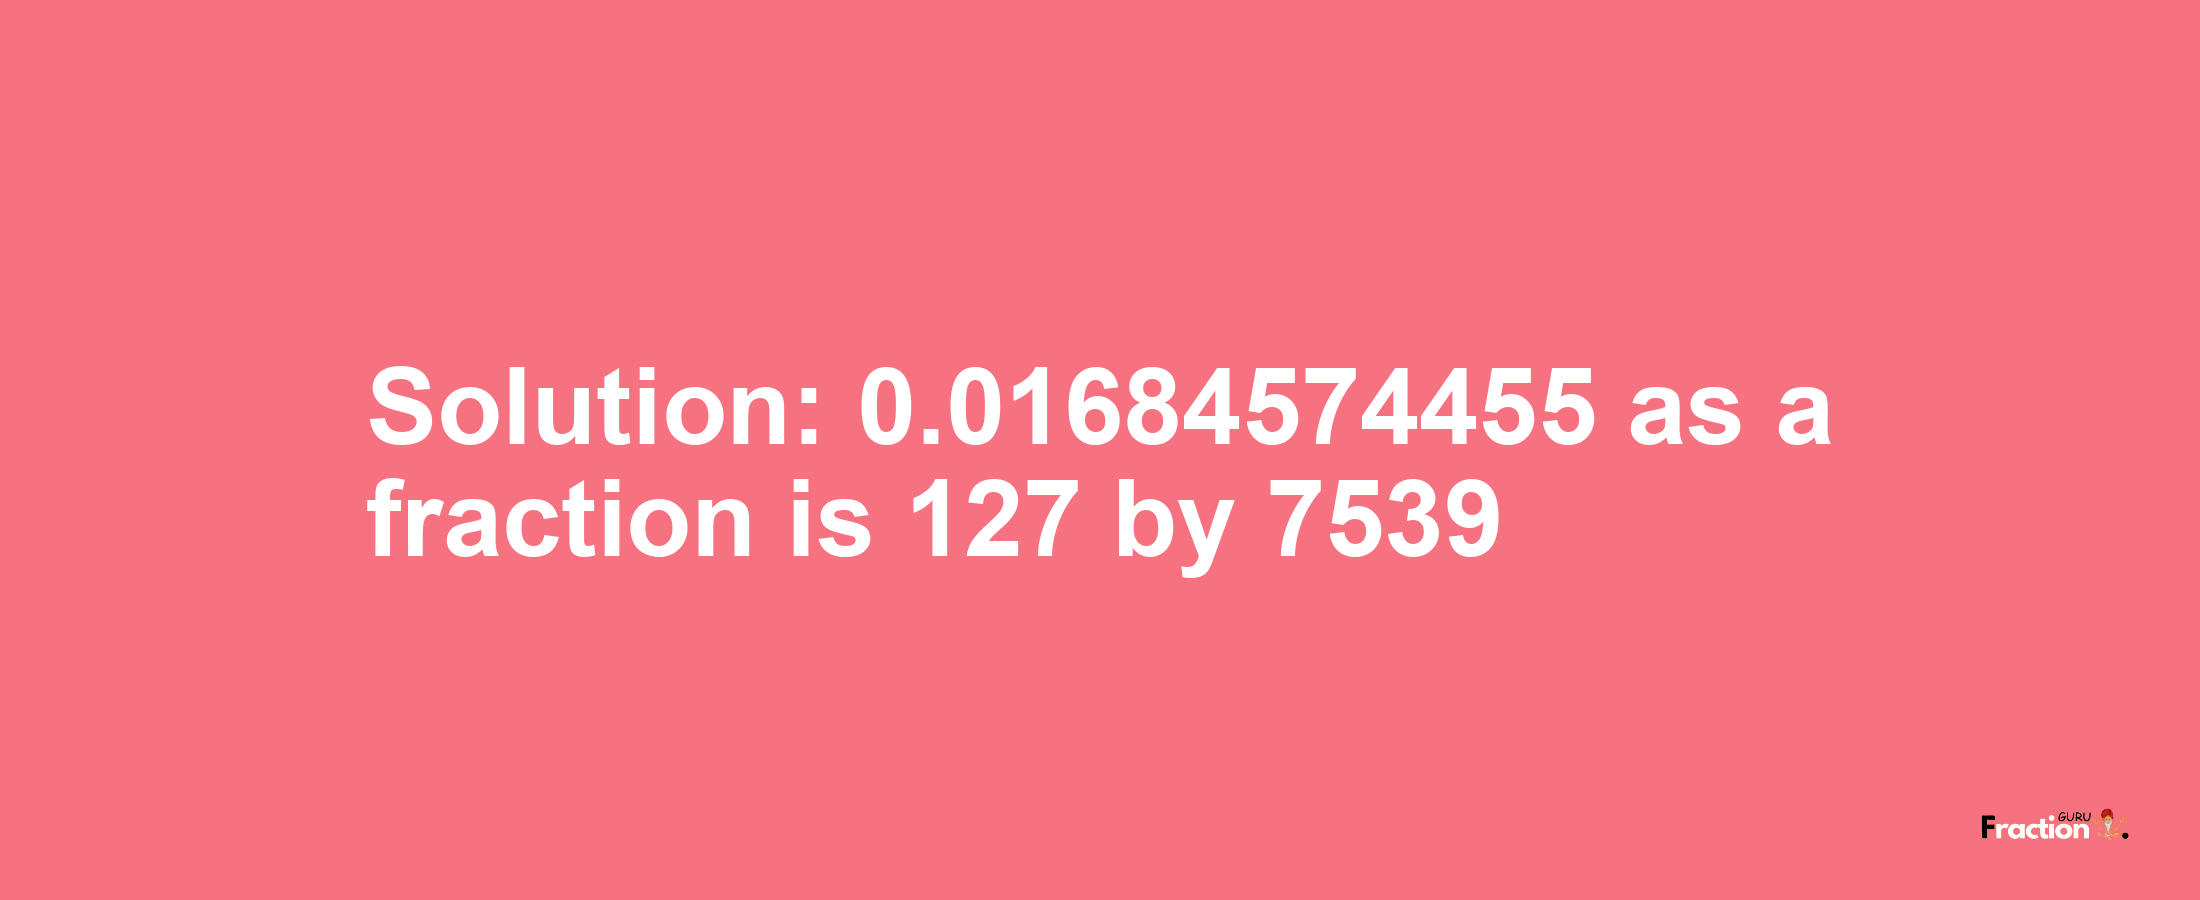 Solution:0.01684574455 as a fraction is 127/7539